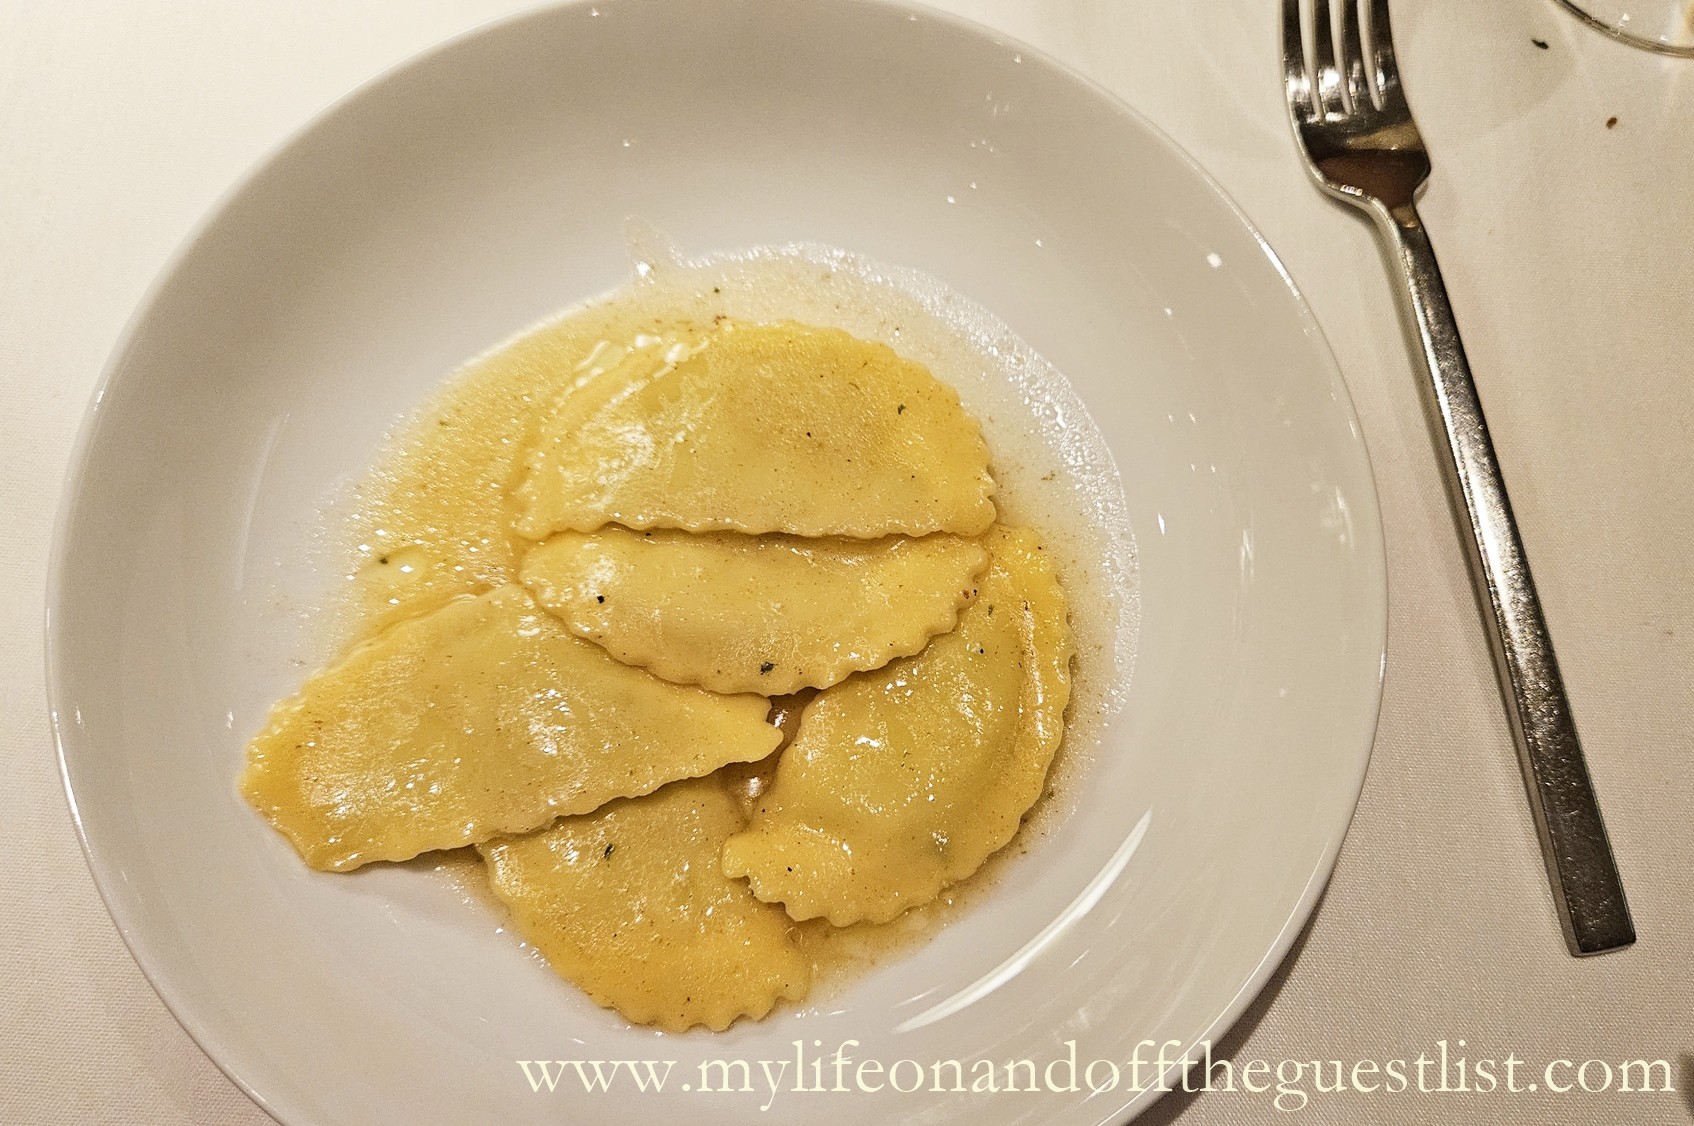 An Evening with Pure Flour From Europe at Eataly's Bar Milano